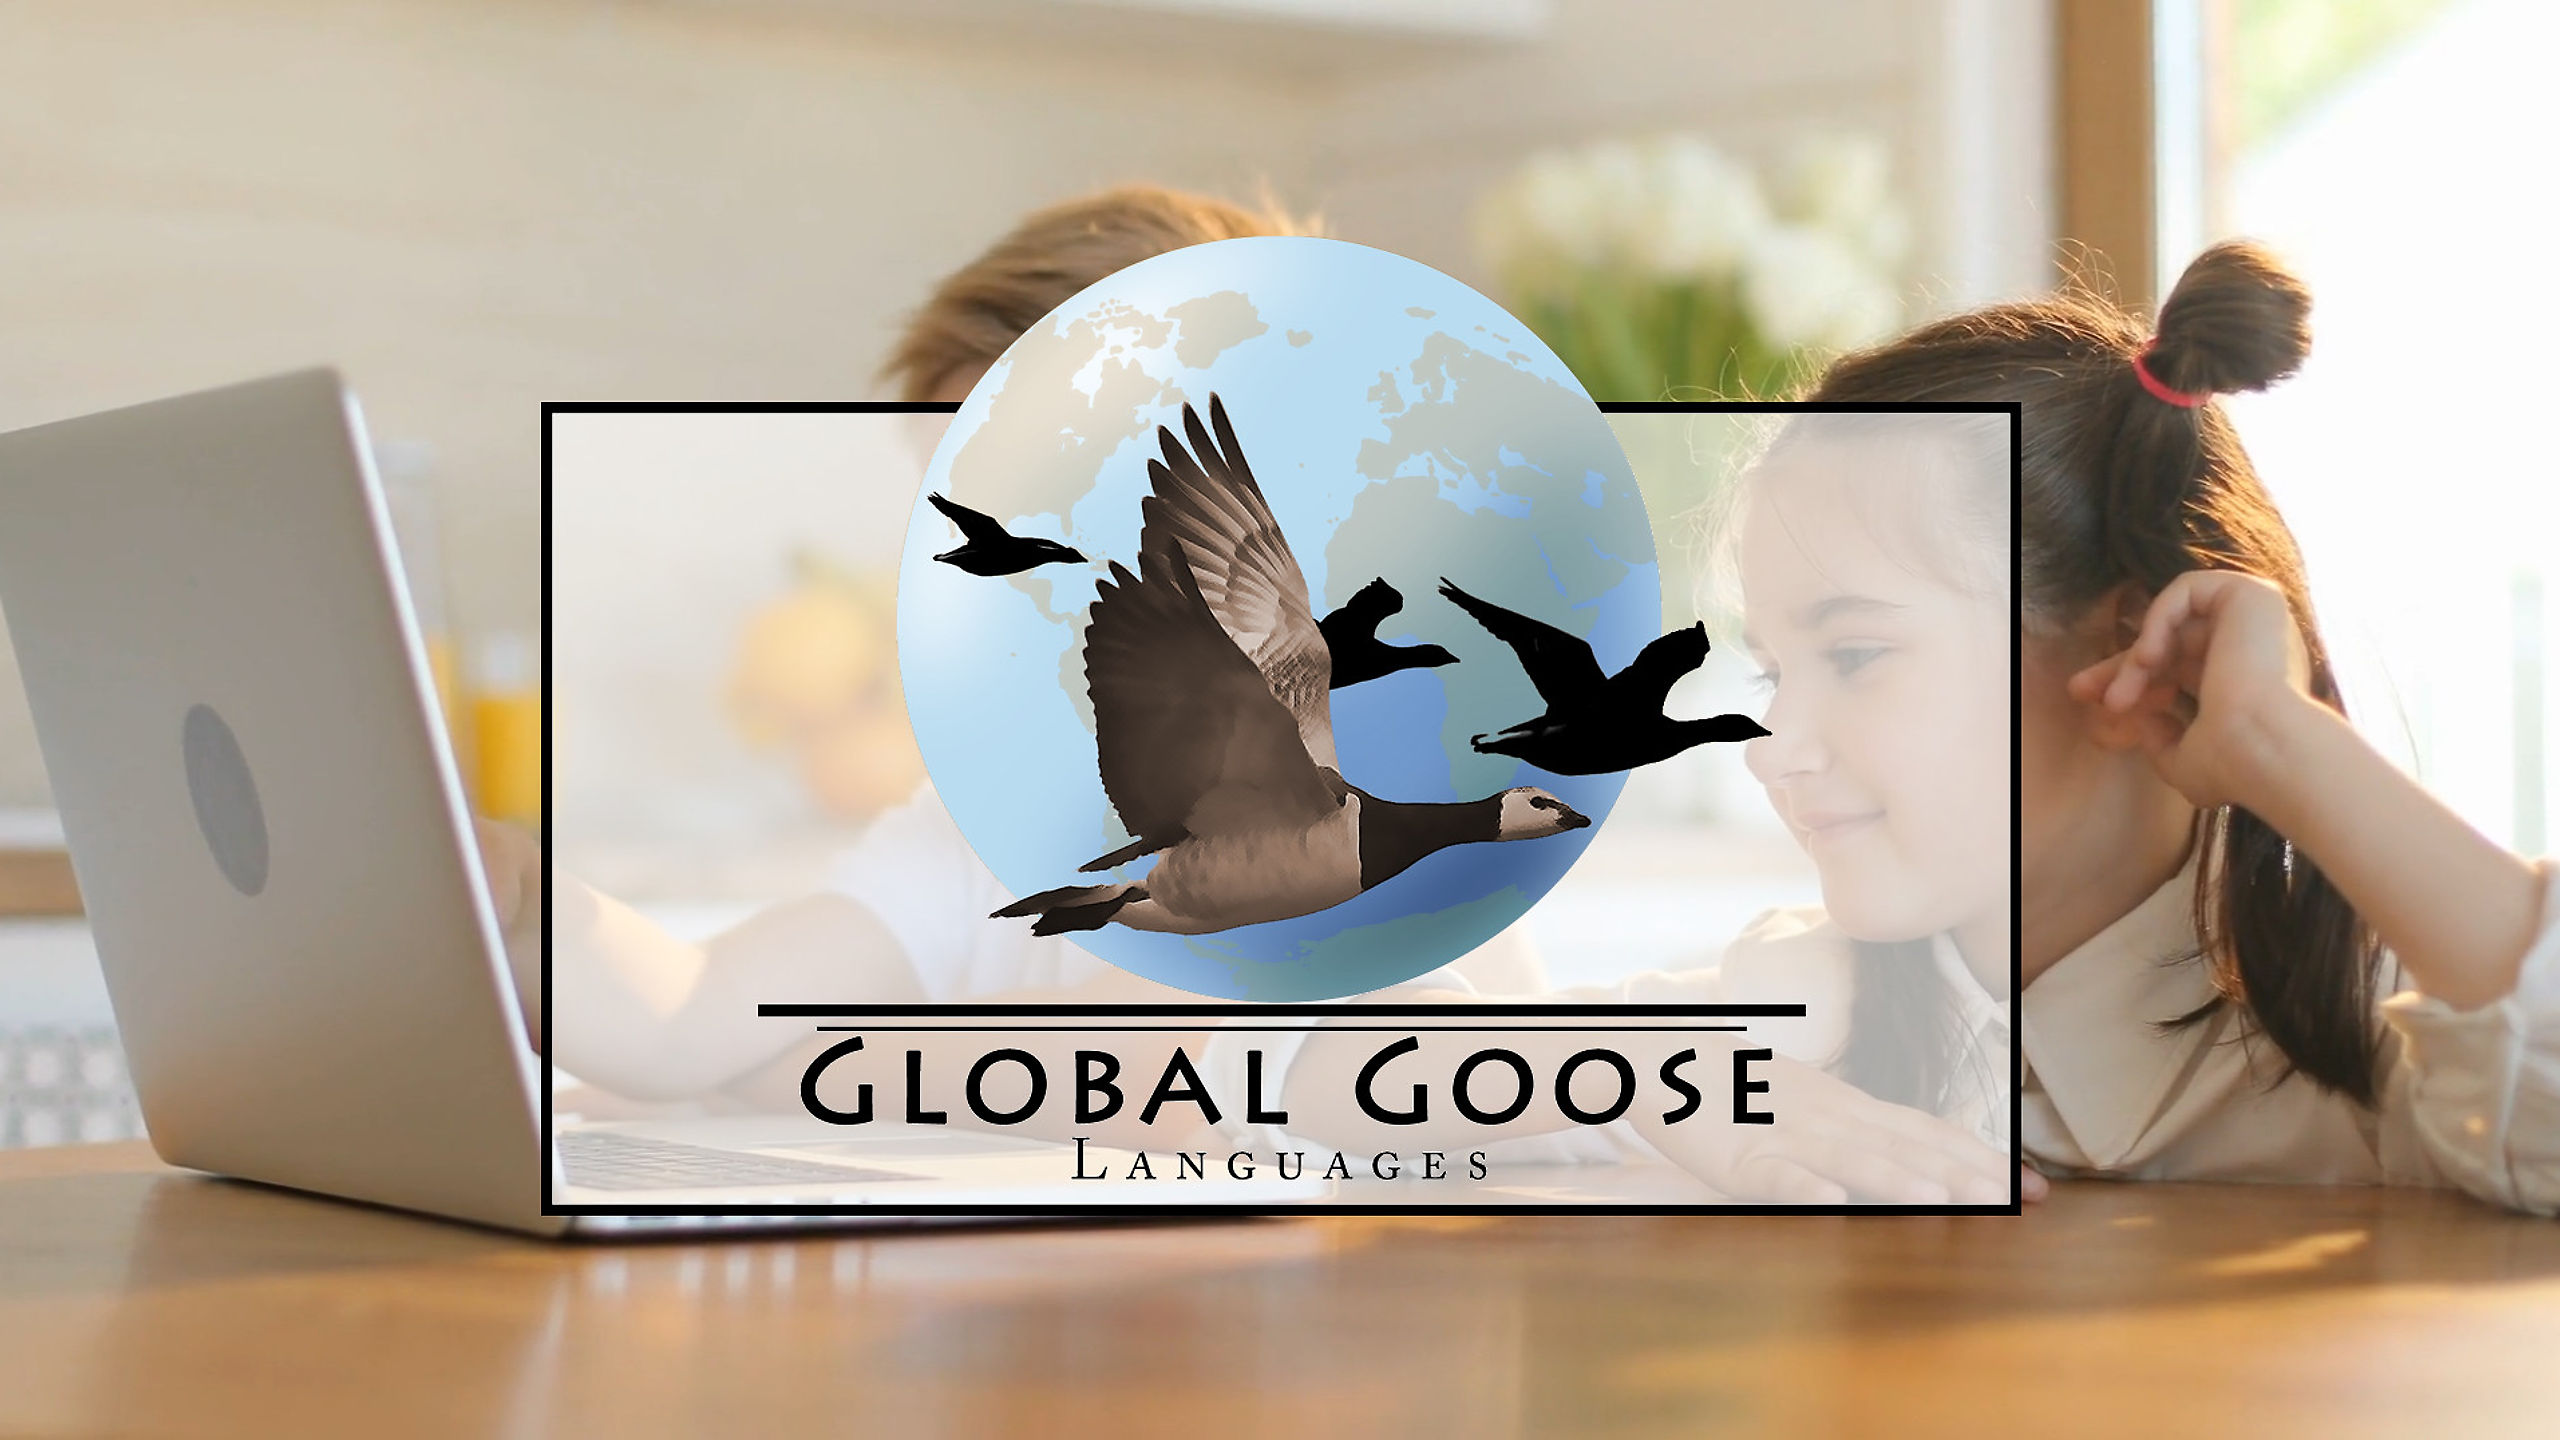 About Global Goose Languages